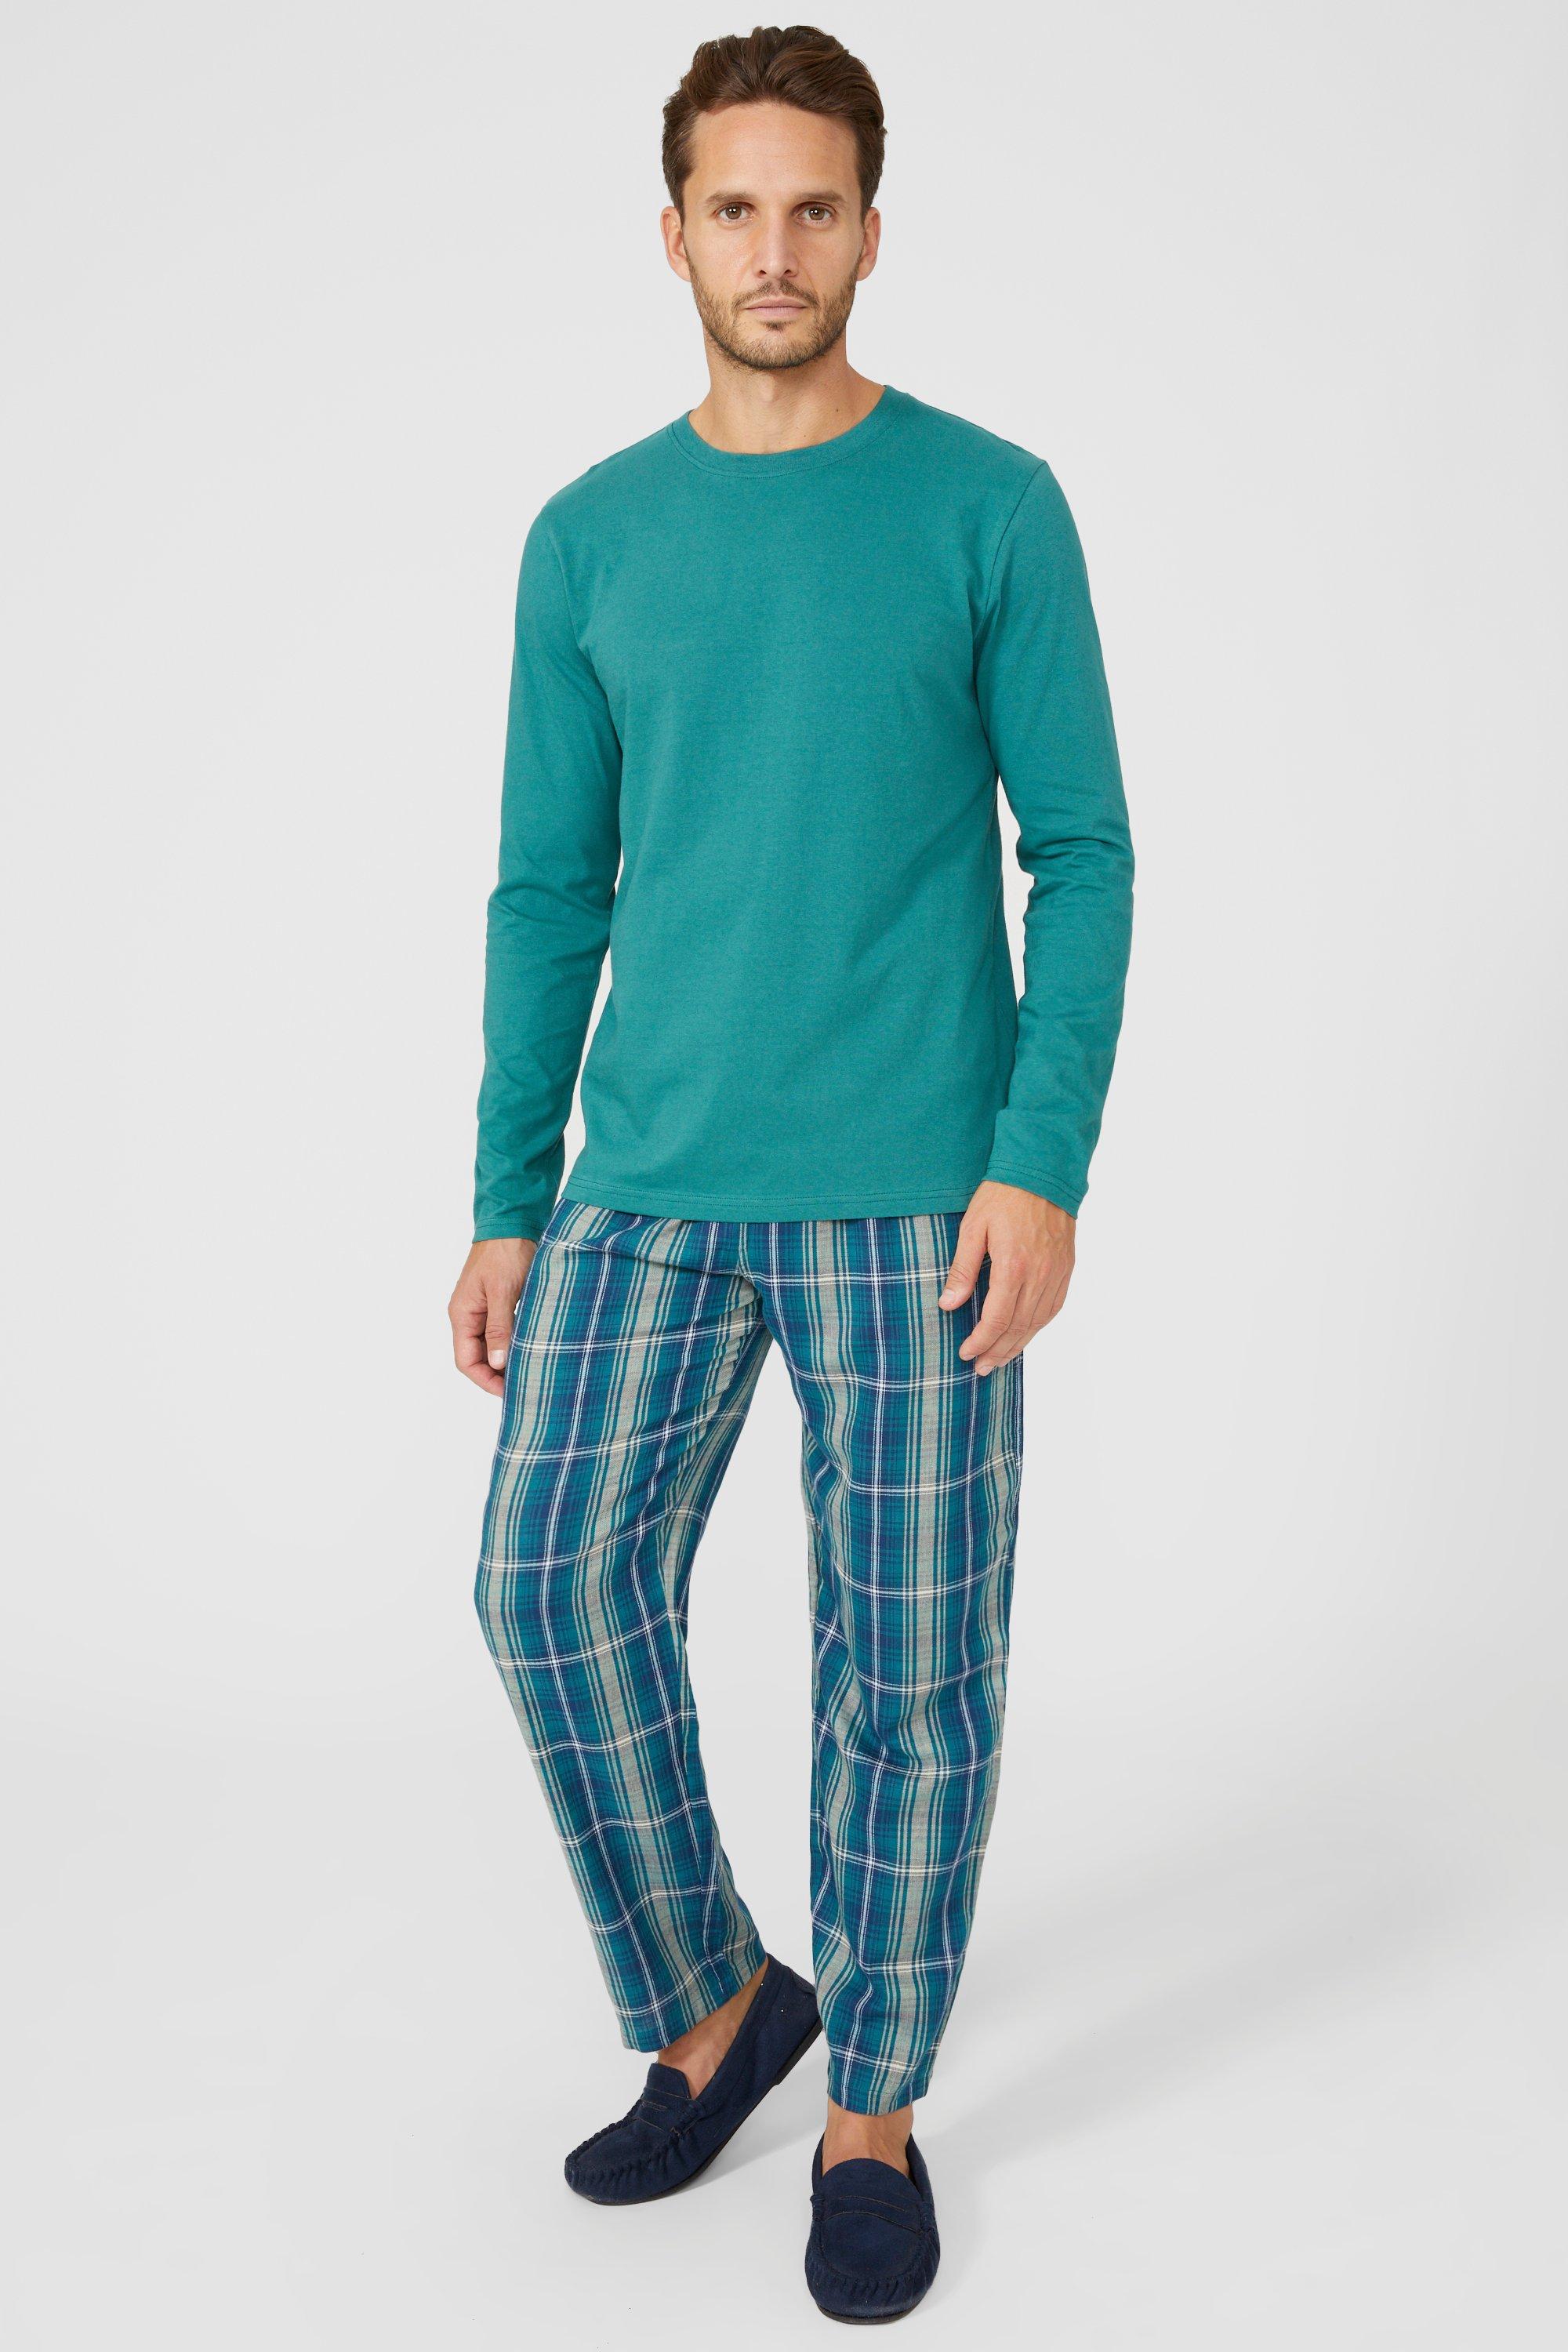 Long Sleeve Crew Neck Tee And Check Pant Set